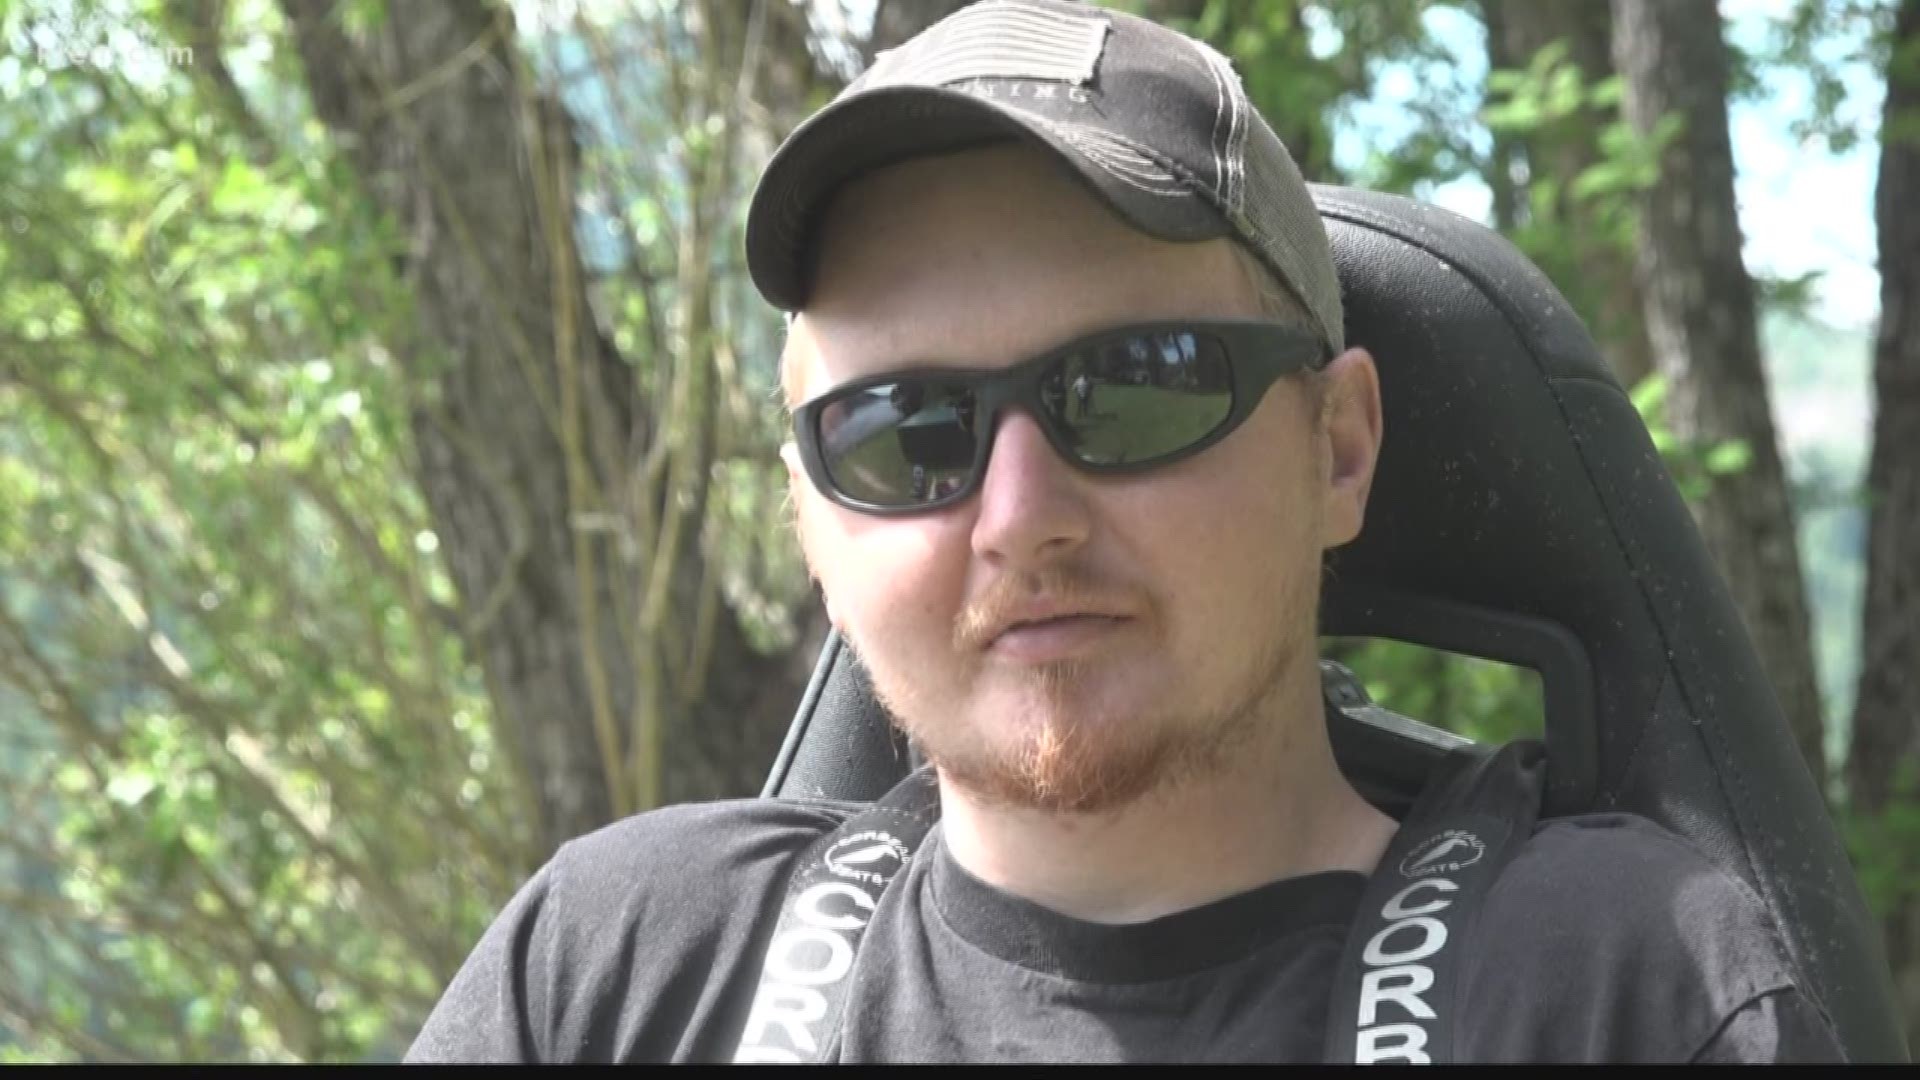 Jordan Simon was paralyzed from the chest down during an accident three years ago. In 2018, he rolled his truck in another accident.